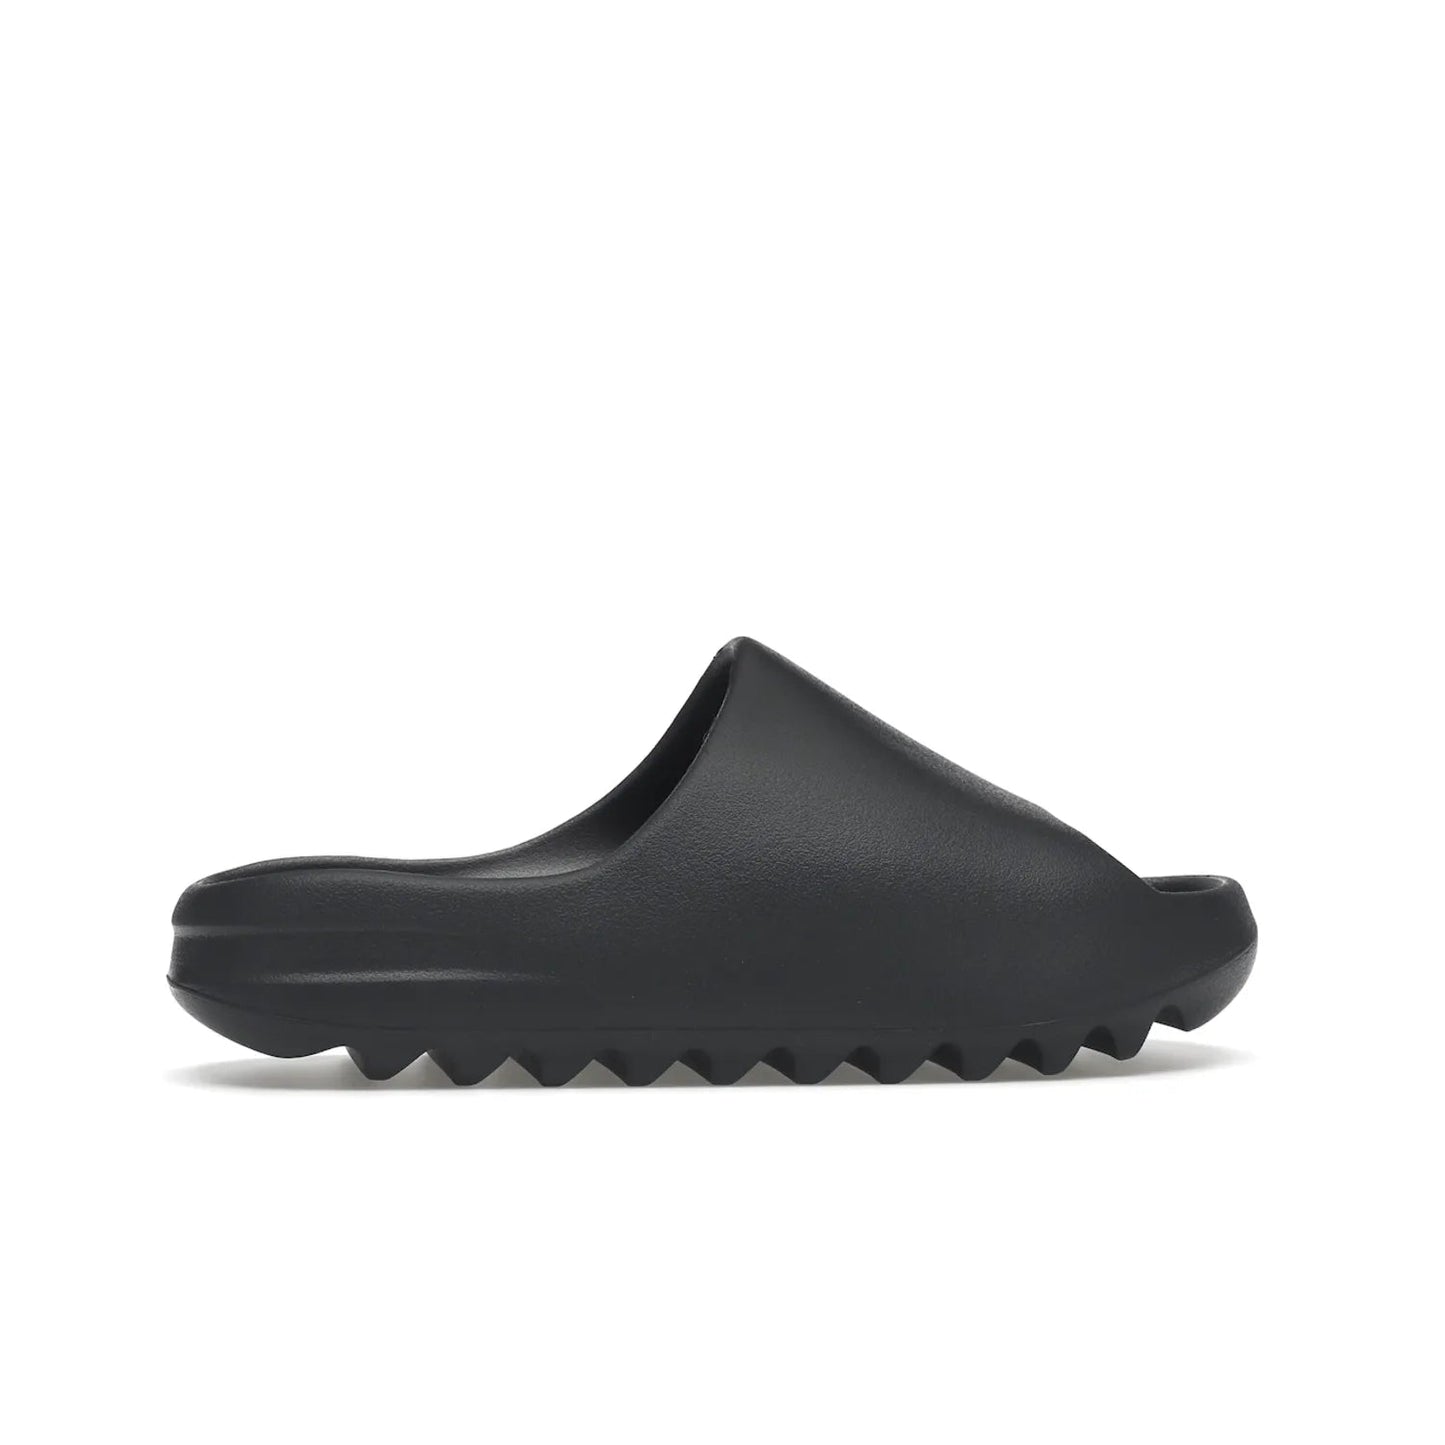 adidas Yeezy Slide Slate Grey - Image 36 - Only at www.BallersClubKickz.com - Stylish & comfortable adidas Yeezy Slide Slate Grey features an EVA foam upper, strategic cutouts, textured outsole pattern, & easy slip-on design for modern comfort & classic style.